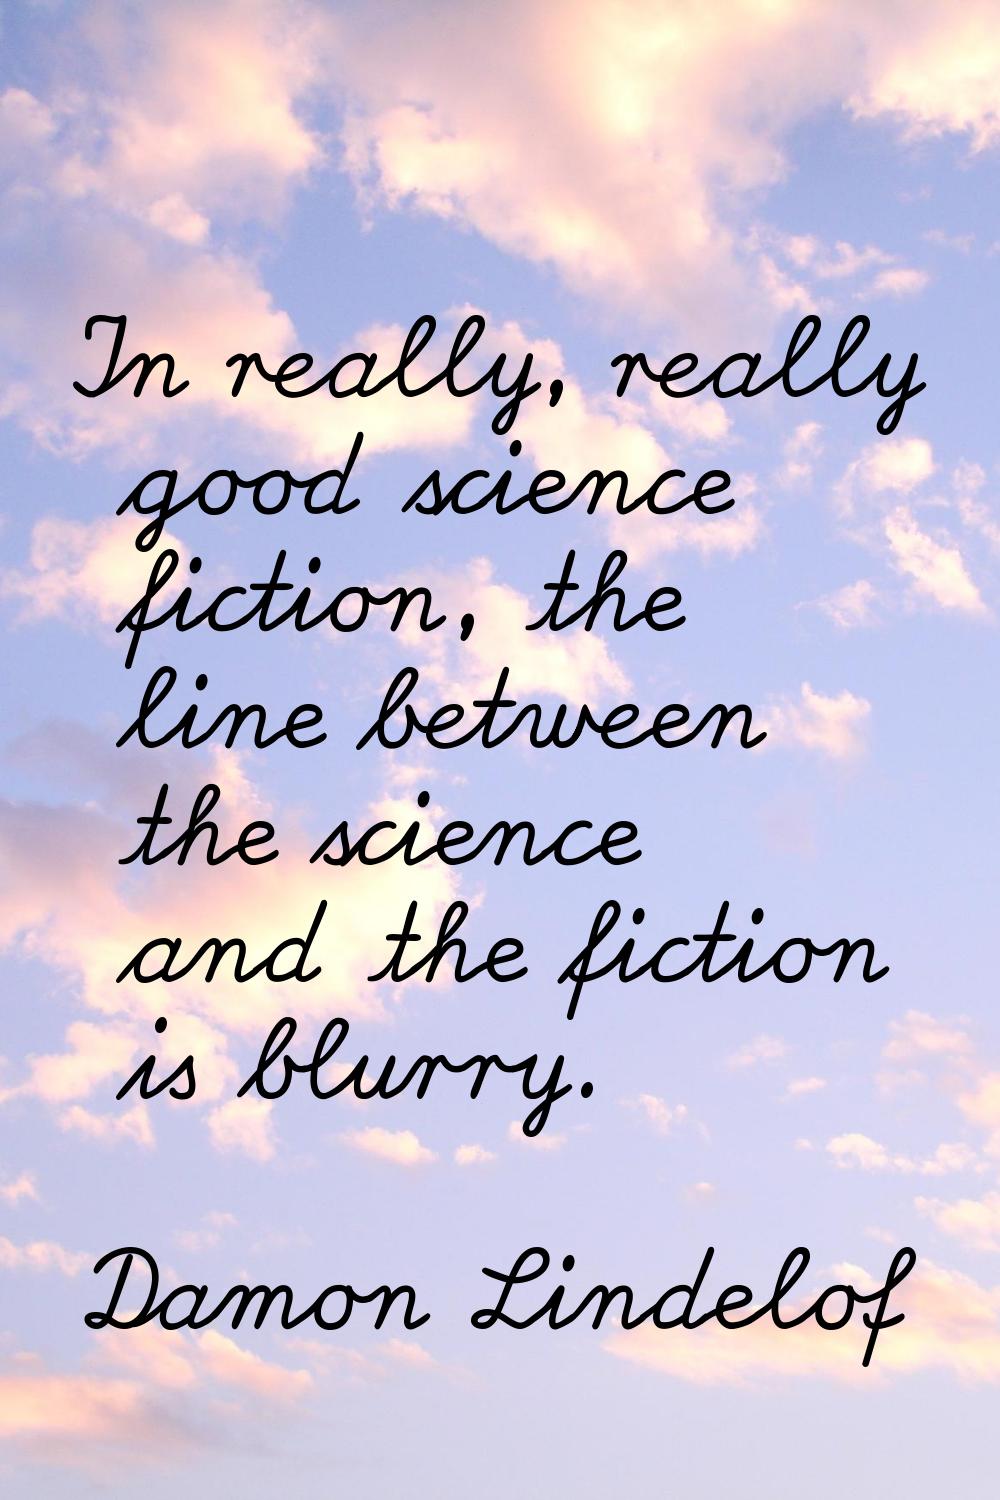 In really, really good science fiction, the line between the science and the fiction is blurry.